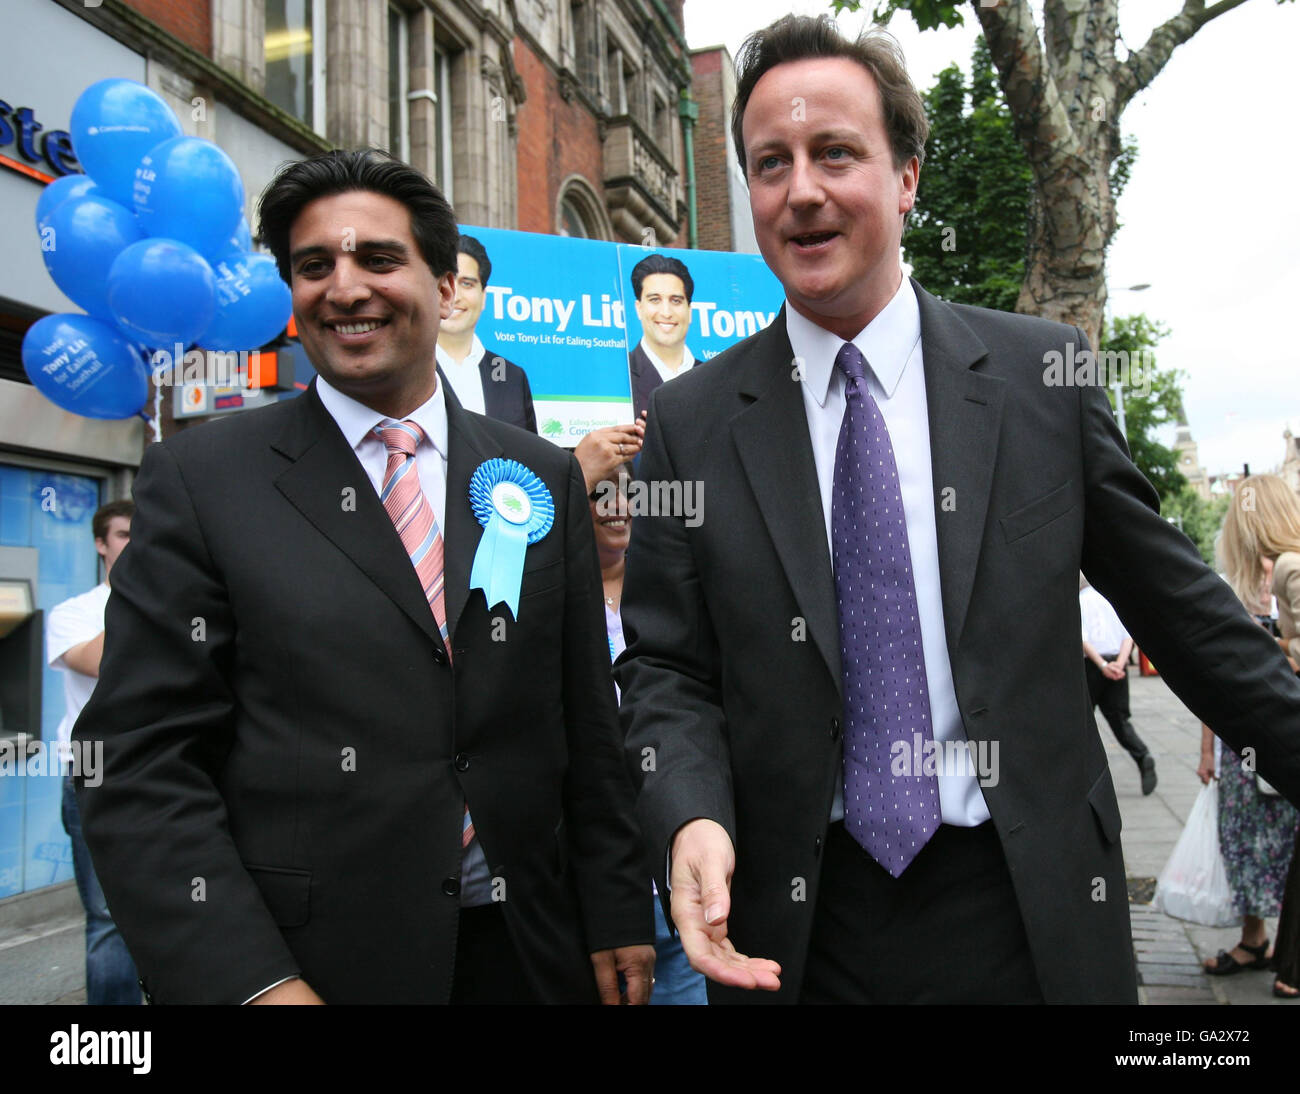 Conservative Party leader David Cameron campaigns for the council by-election in Ealing, west London with Tory candidate Tony Lit (left). Stock Photo